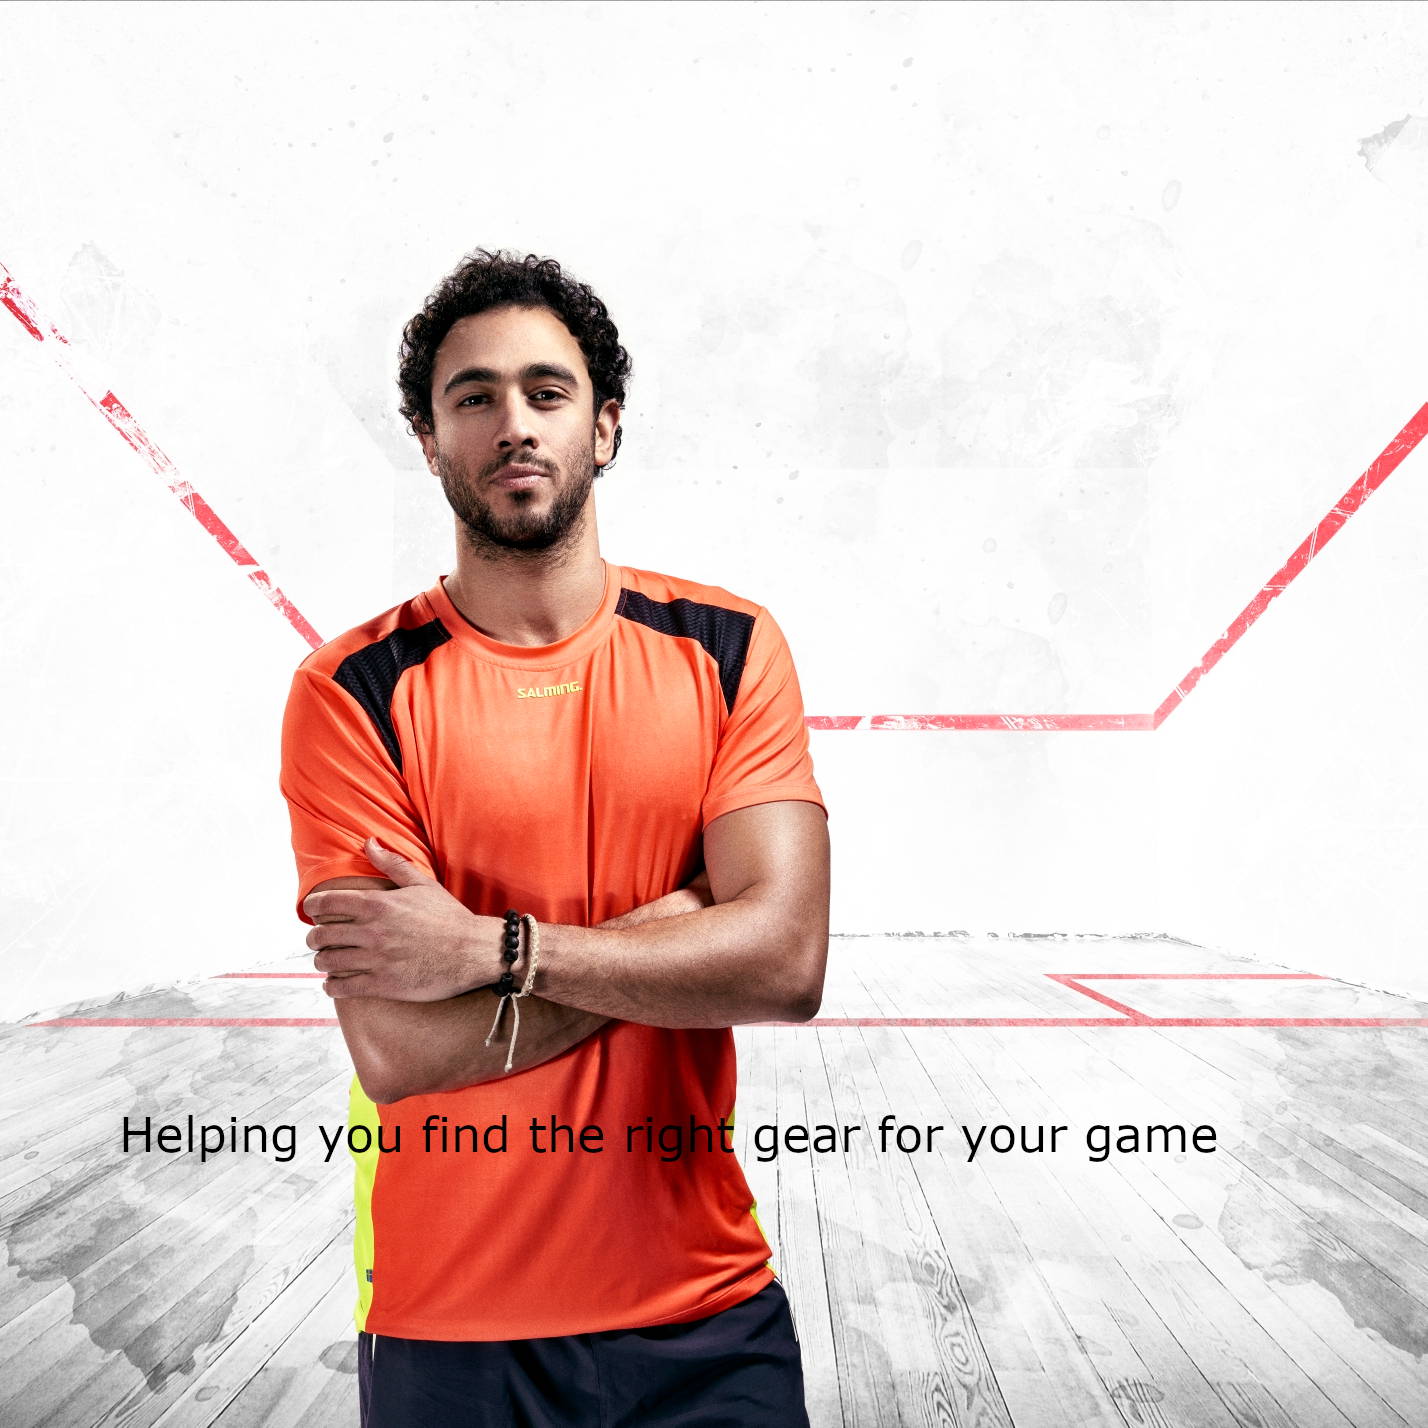 Control the 'T' Sports - Squash - Helping you find the right gear for your game